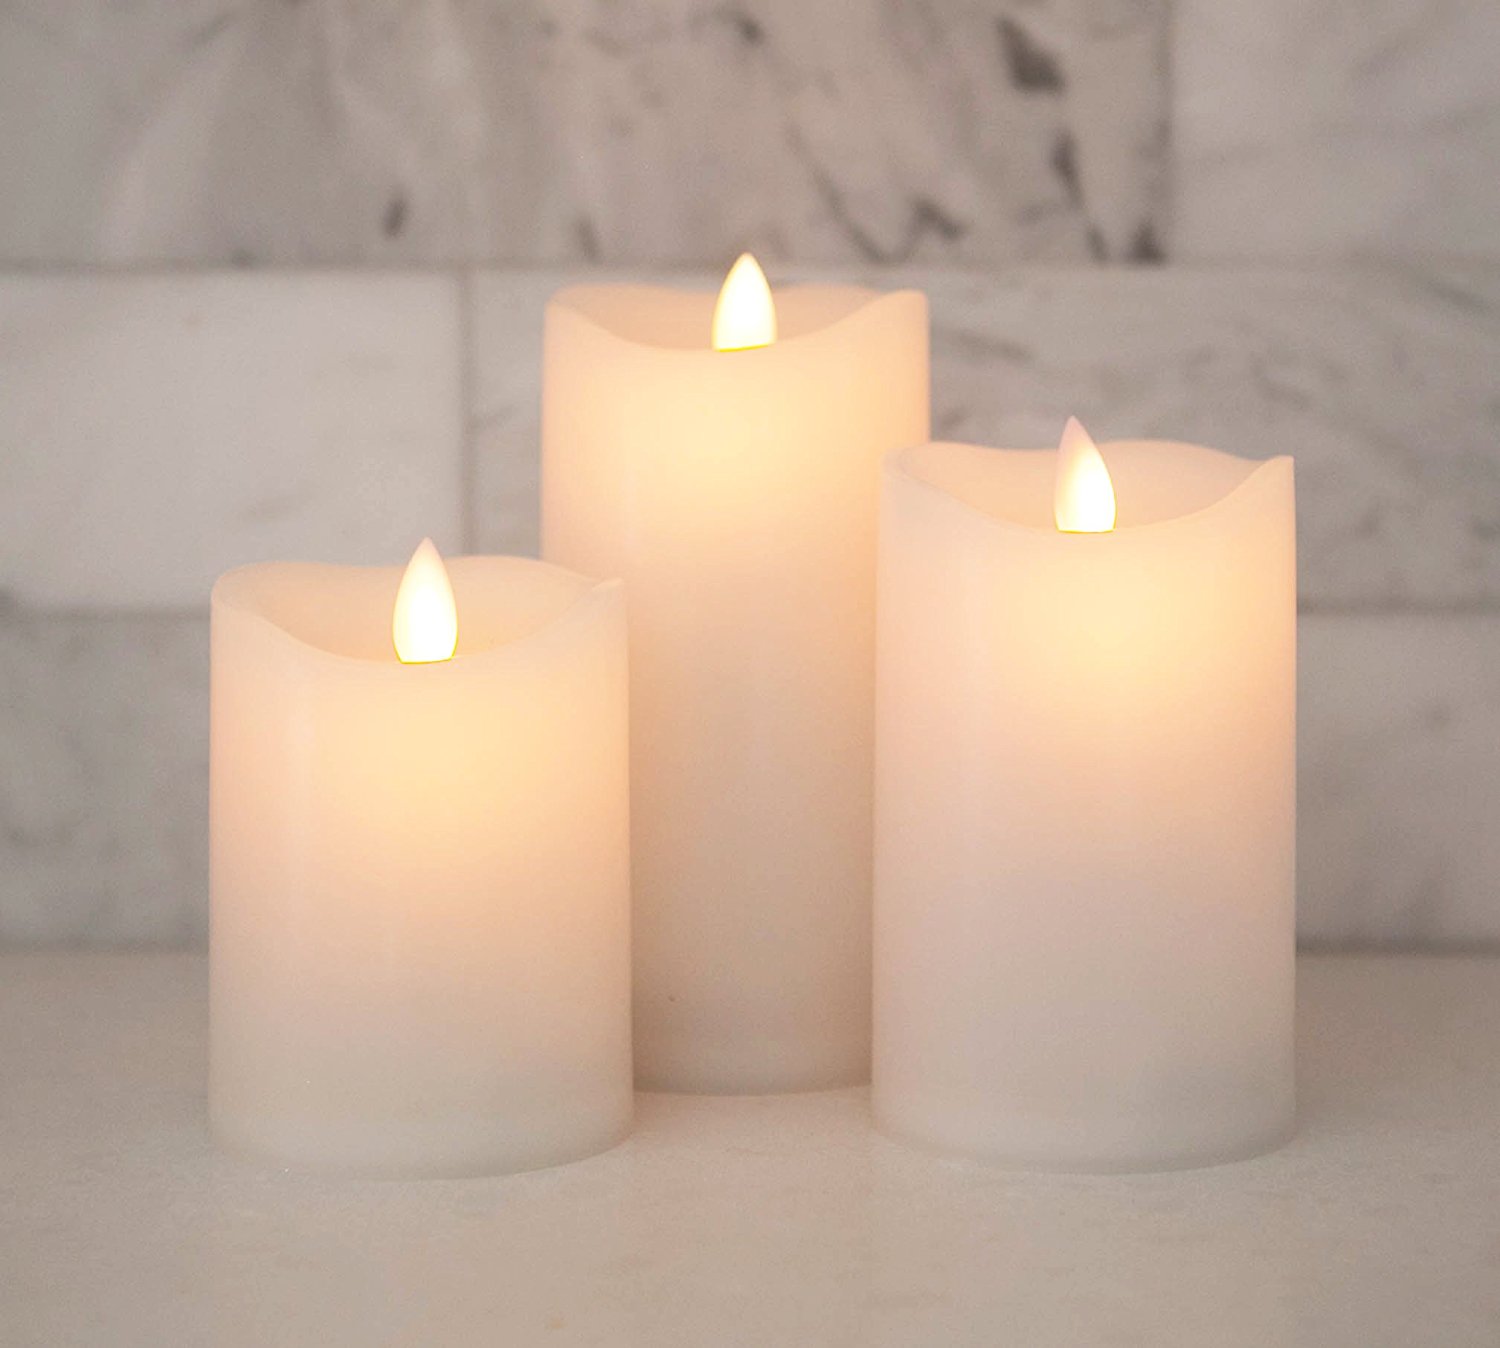 When you can't burn candles, these very realistic flameless options are perfect. They are a great addition to any dorm room or space where kids may be present